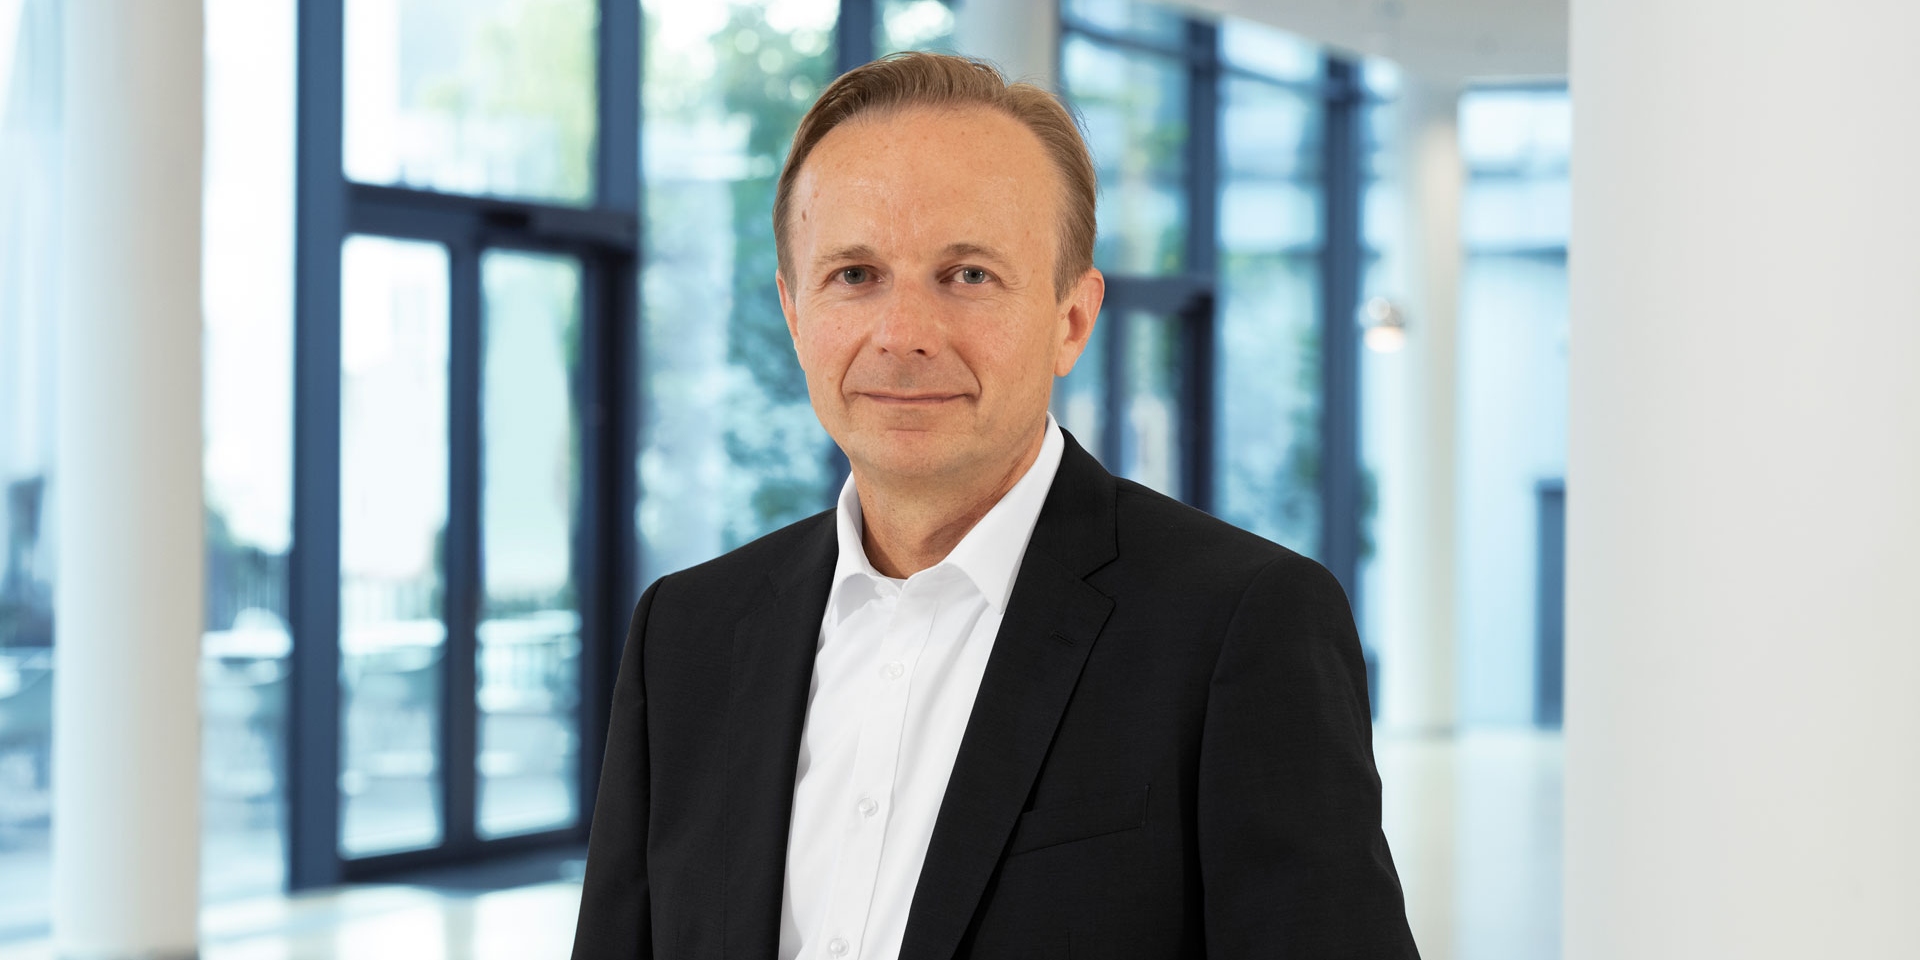 Dr. Christian Müller CFO of the ZEISS Group